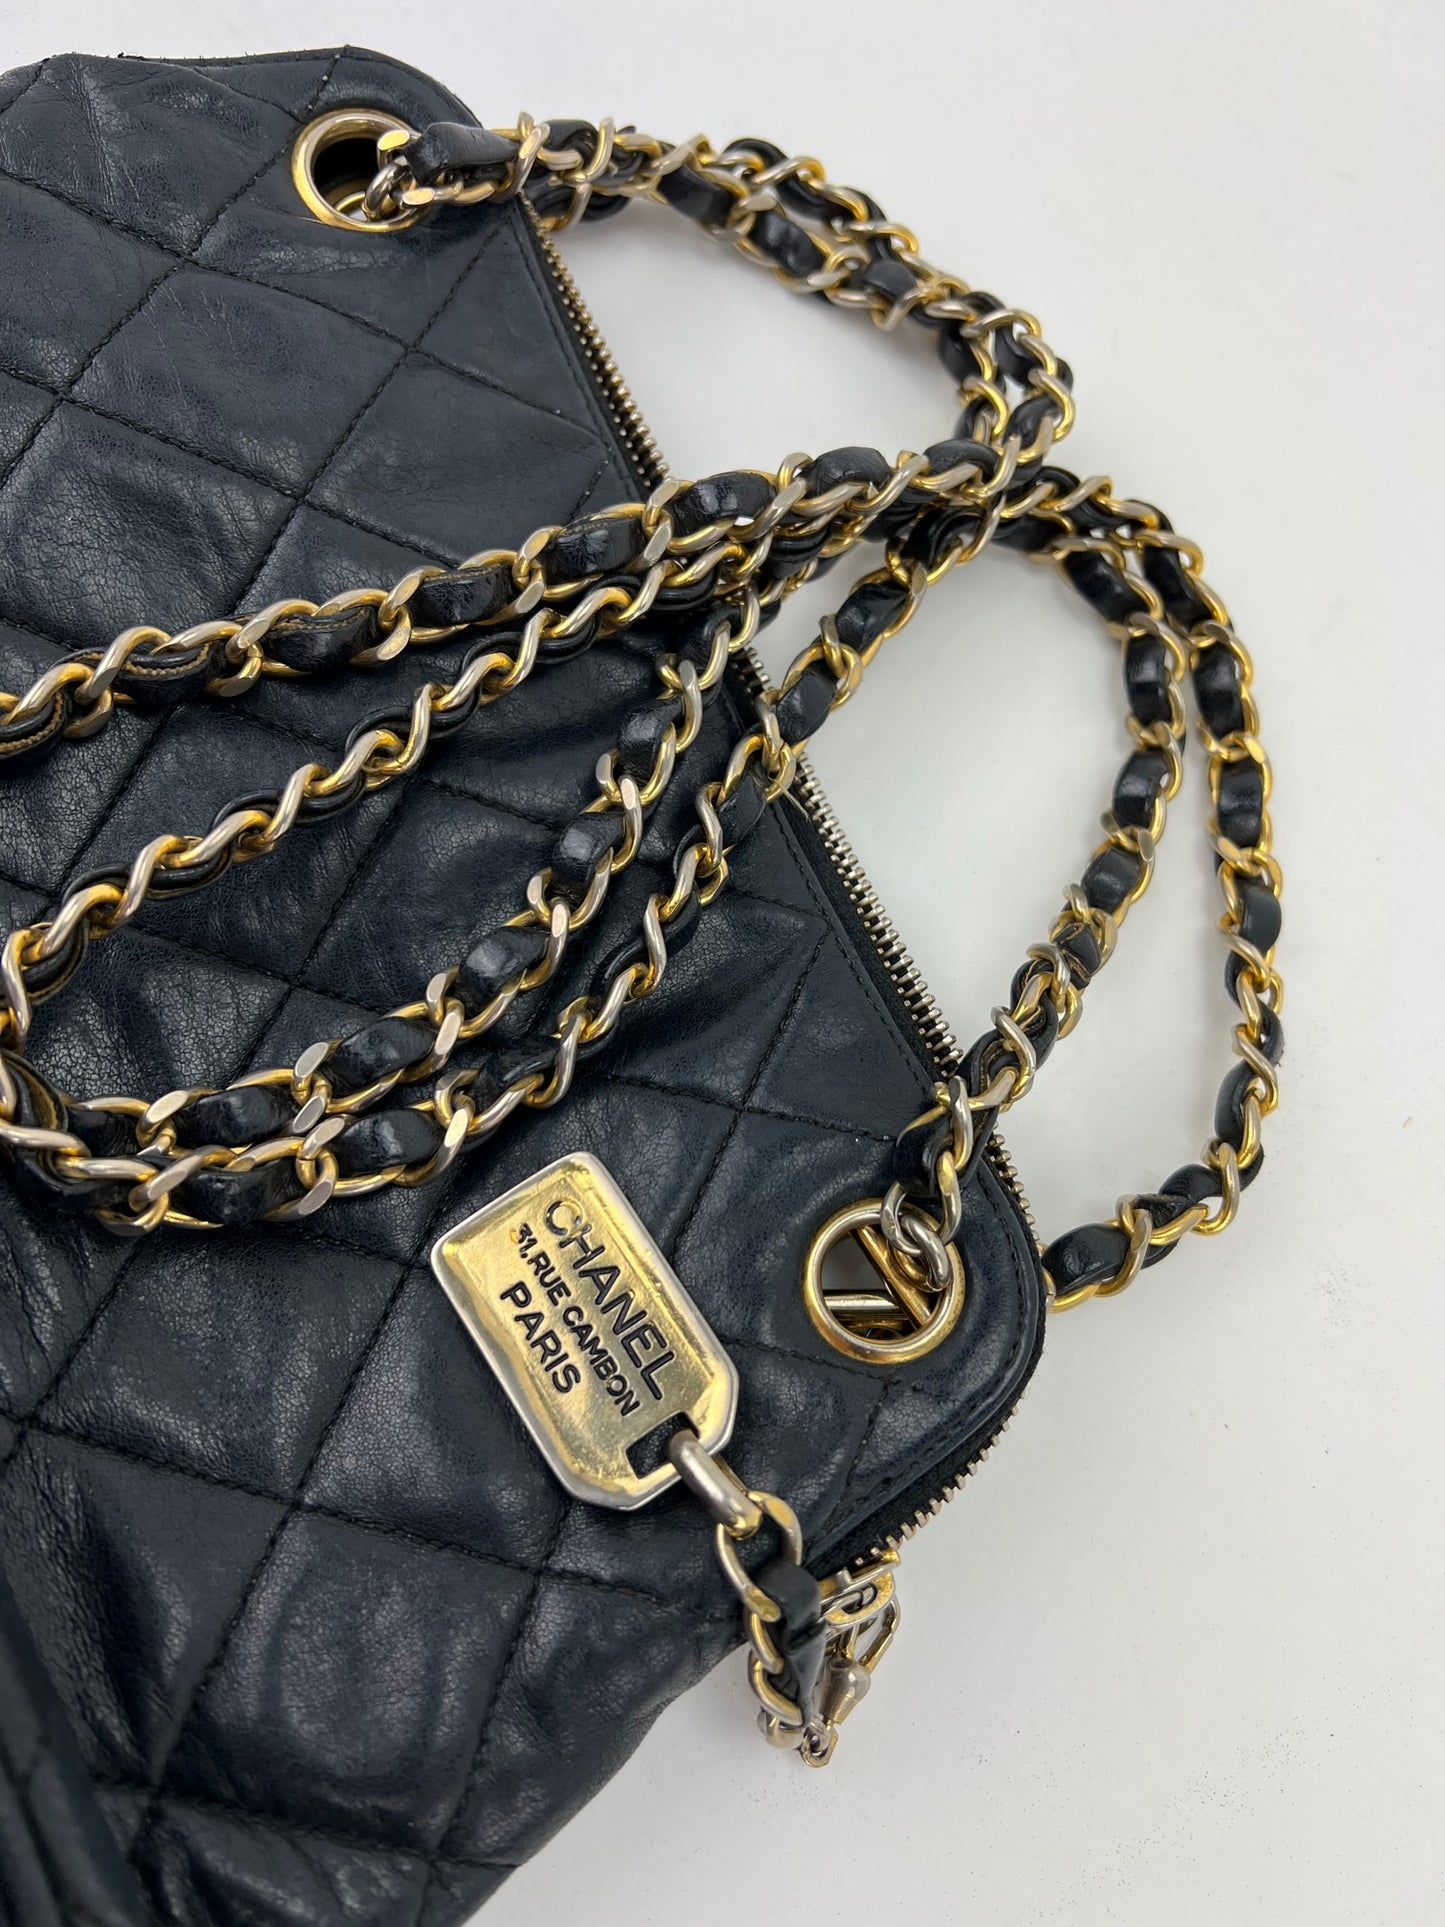 CHANEL VINTAGE FLAP BAG, square quilted leather with brass tone hardware,  chain and leather detachable shoulder strap, matching leather interior,  inside sticker 6692937, 26cm x 13cm H x 4cm.